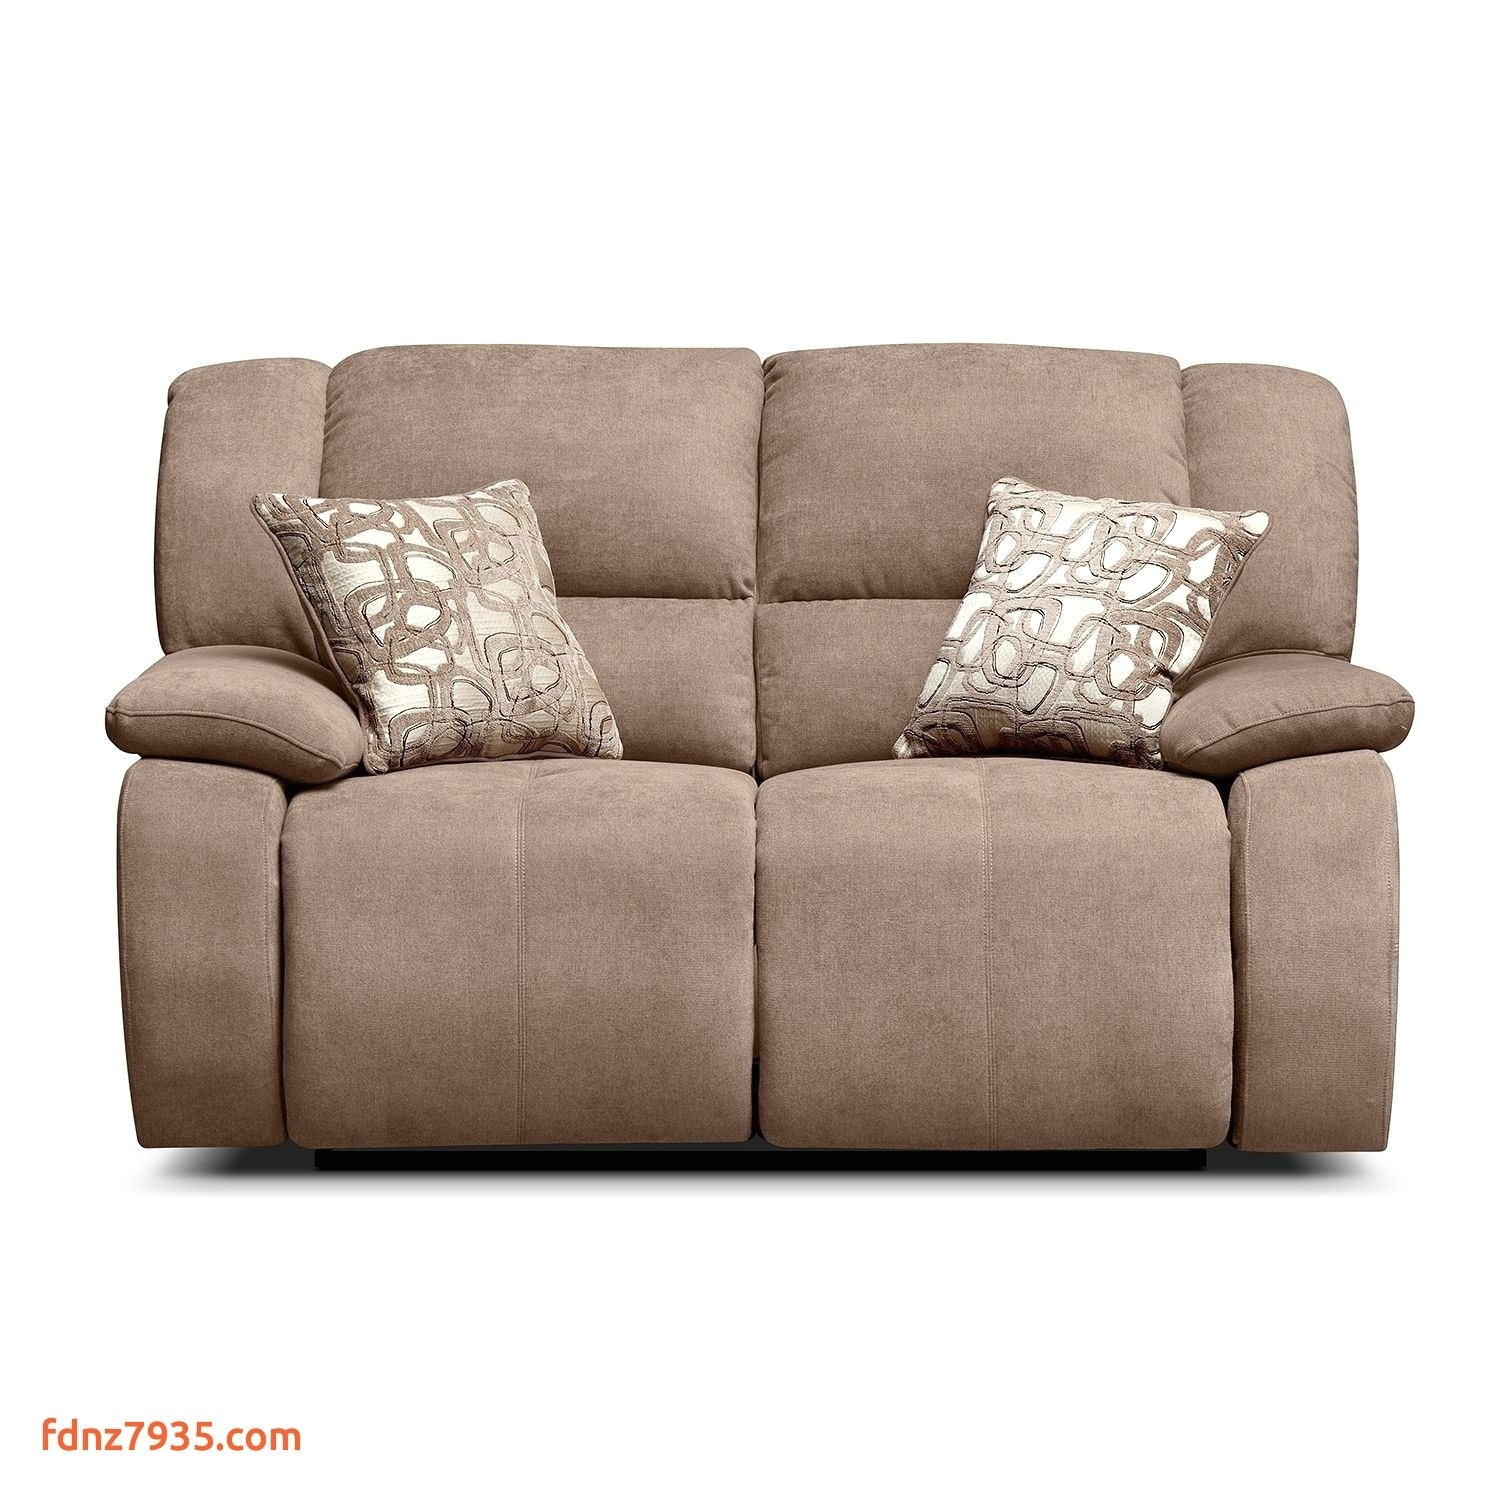 gallery for microfiber tufted sofa inspirational furniture gray reclining loveseat best tufted loveseat 0d tags dual